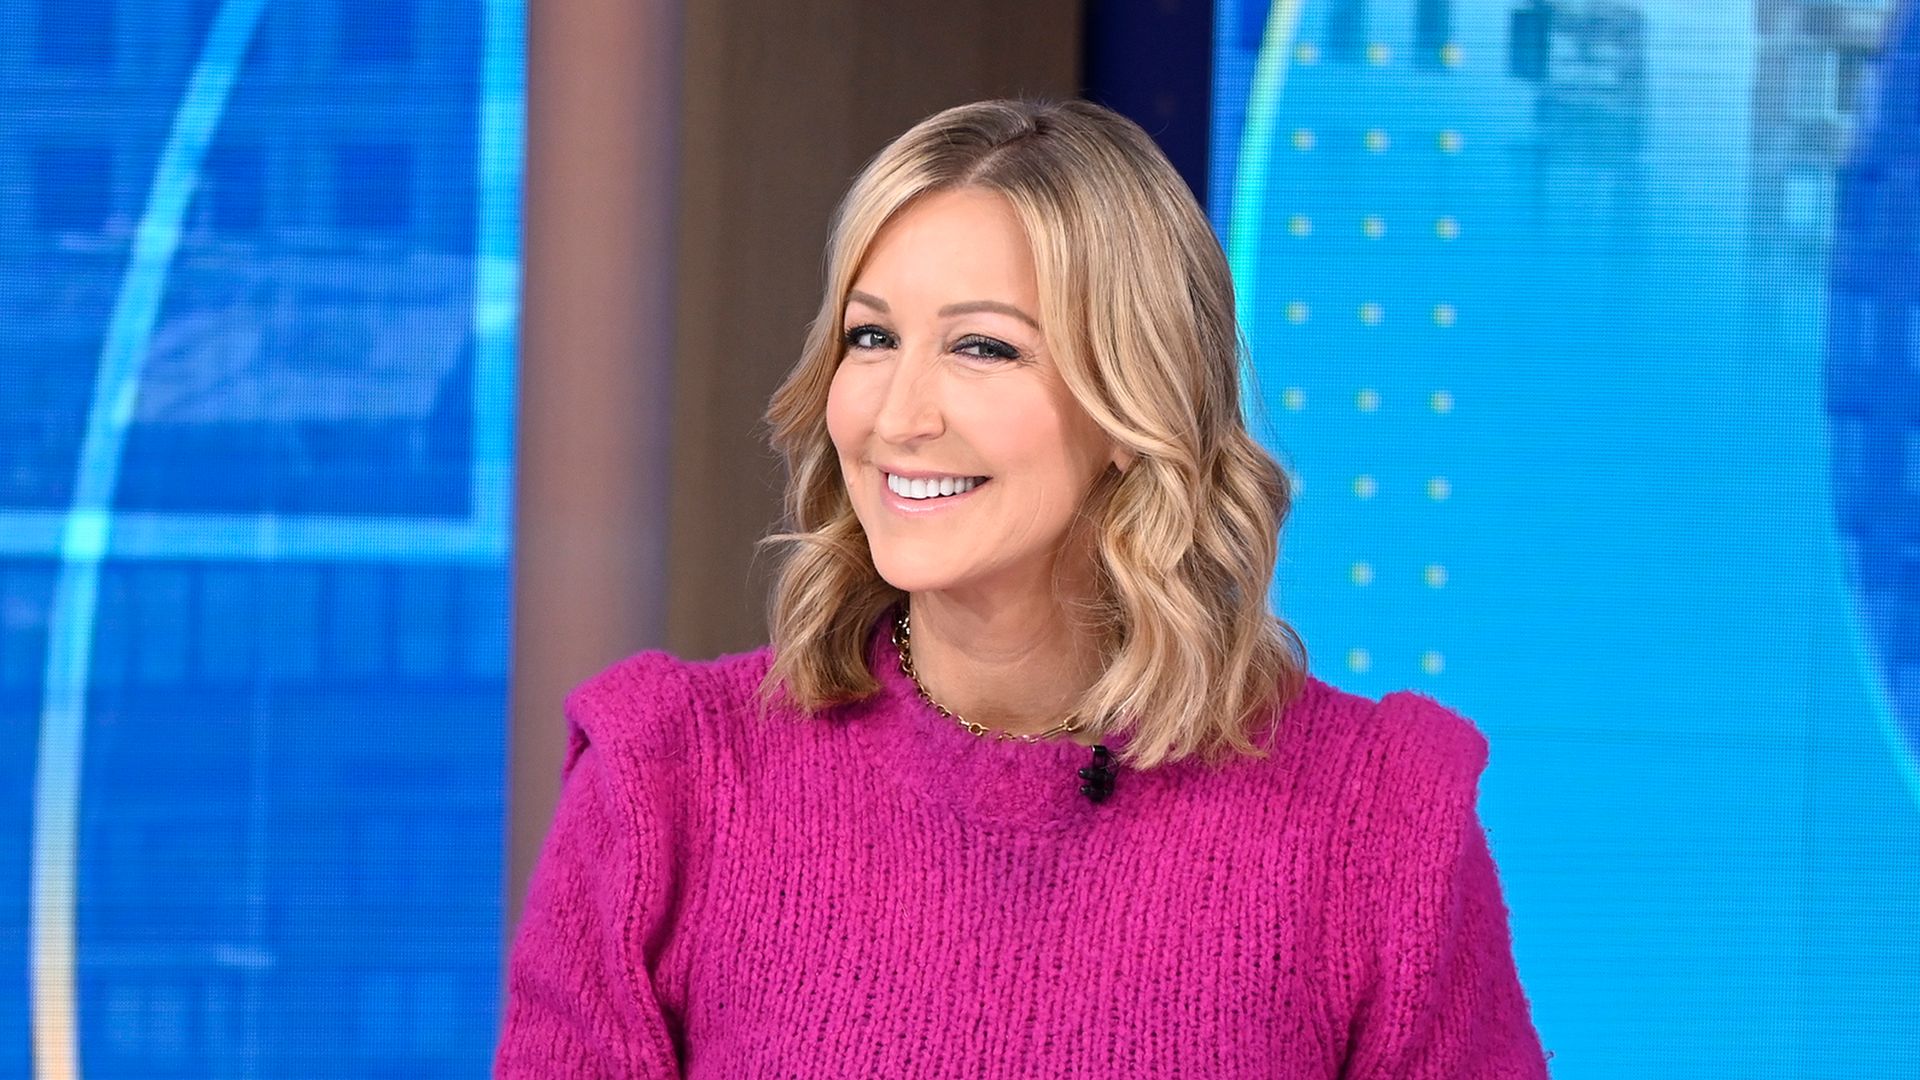 GOOD MORNING AMERICA - 3/31/23 - 
Show coverage of Good Morning America on Friday, March 31, 2023 on ABC with LARA SPENCER